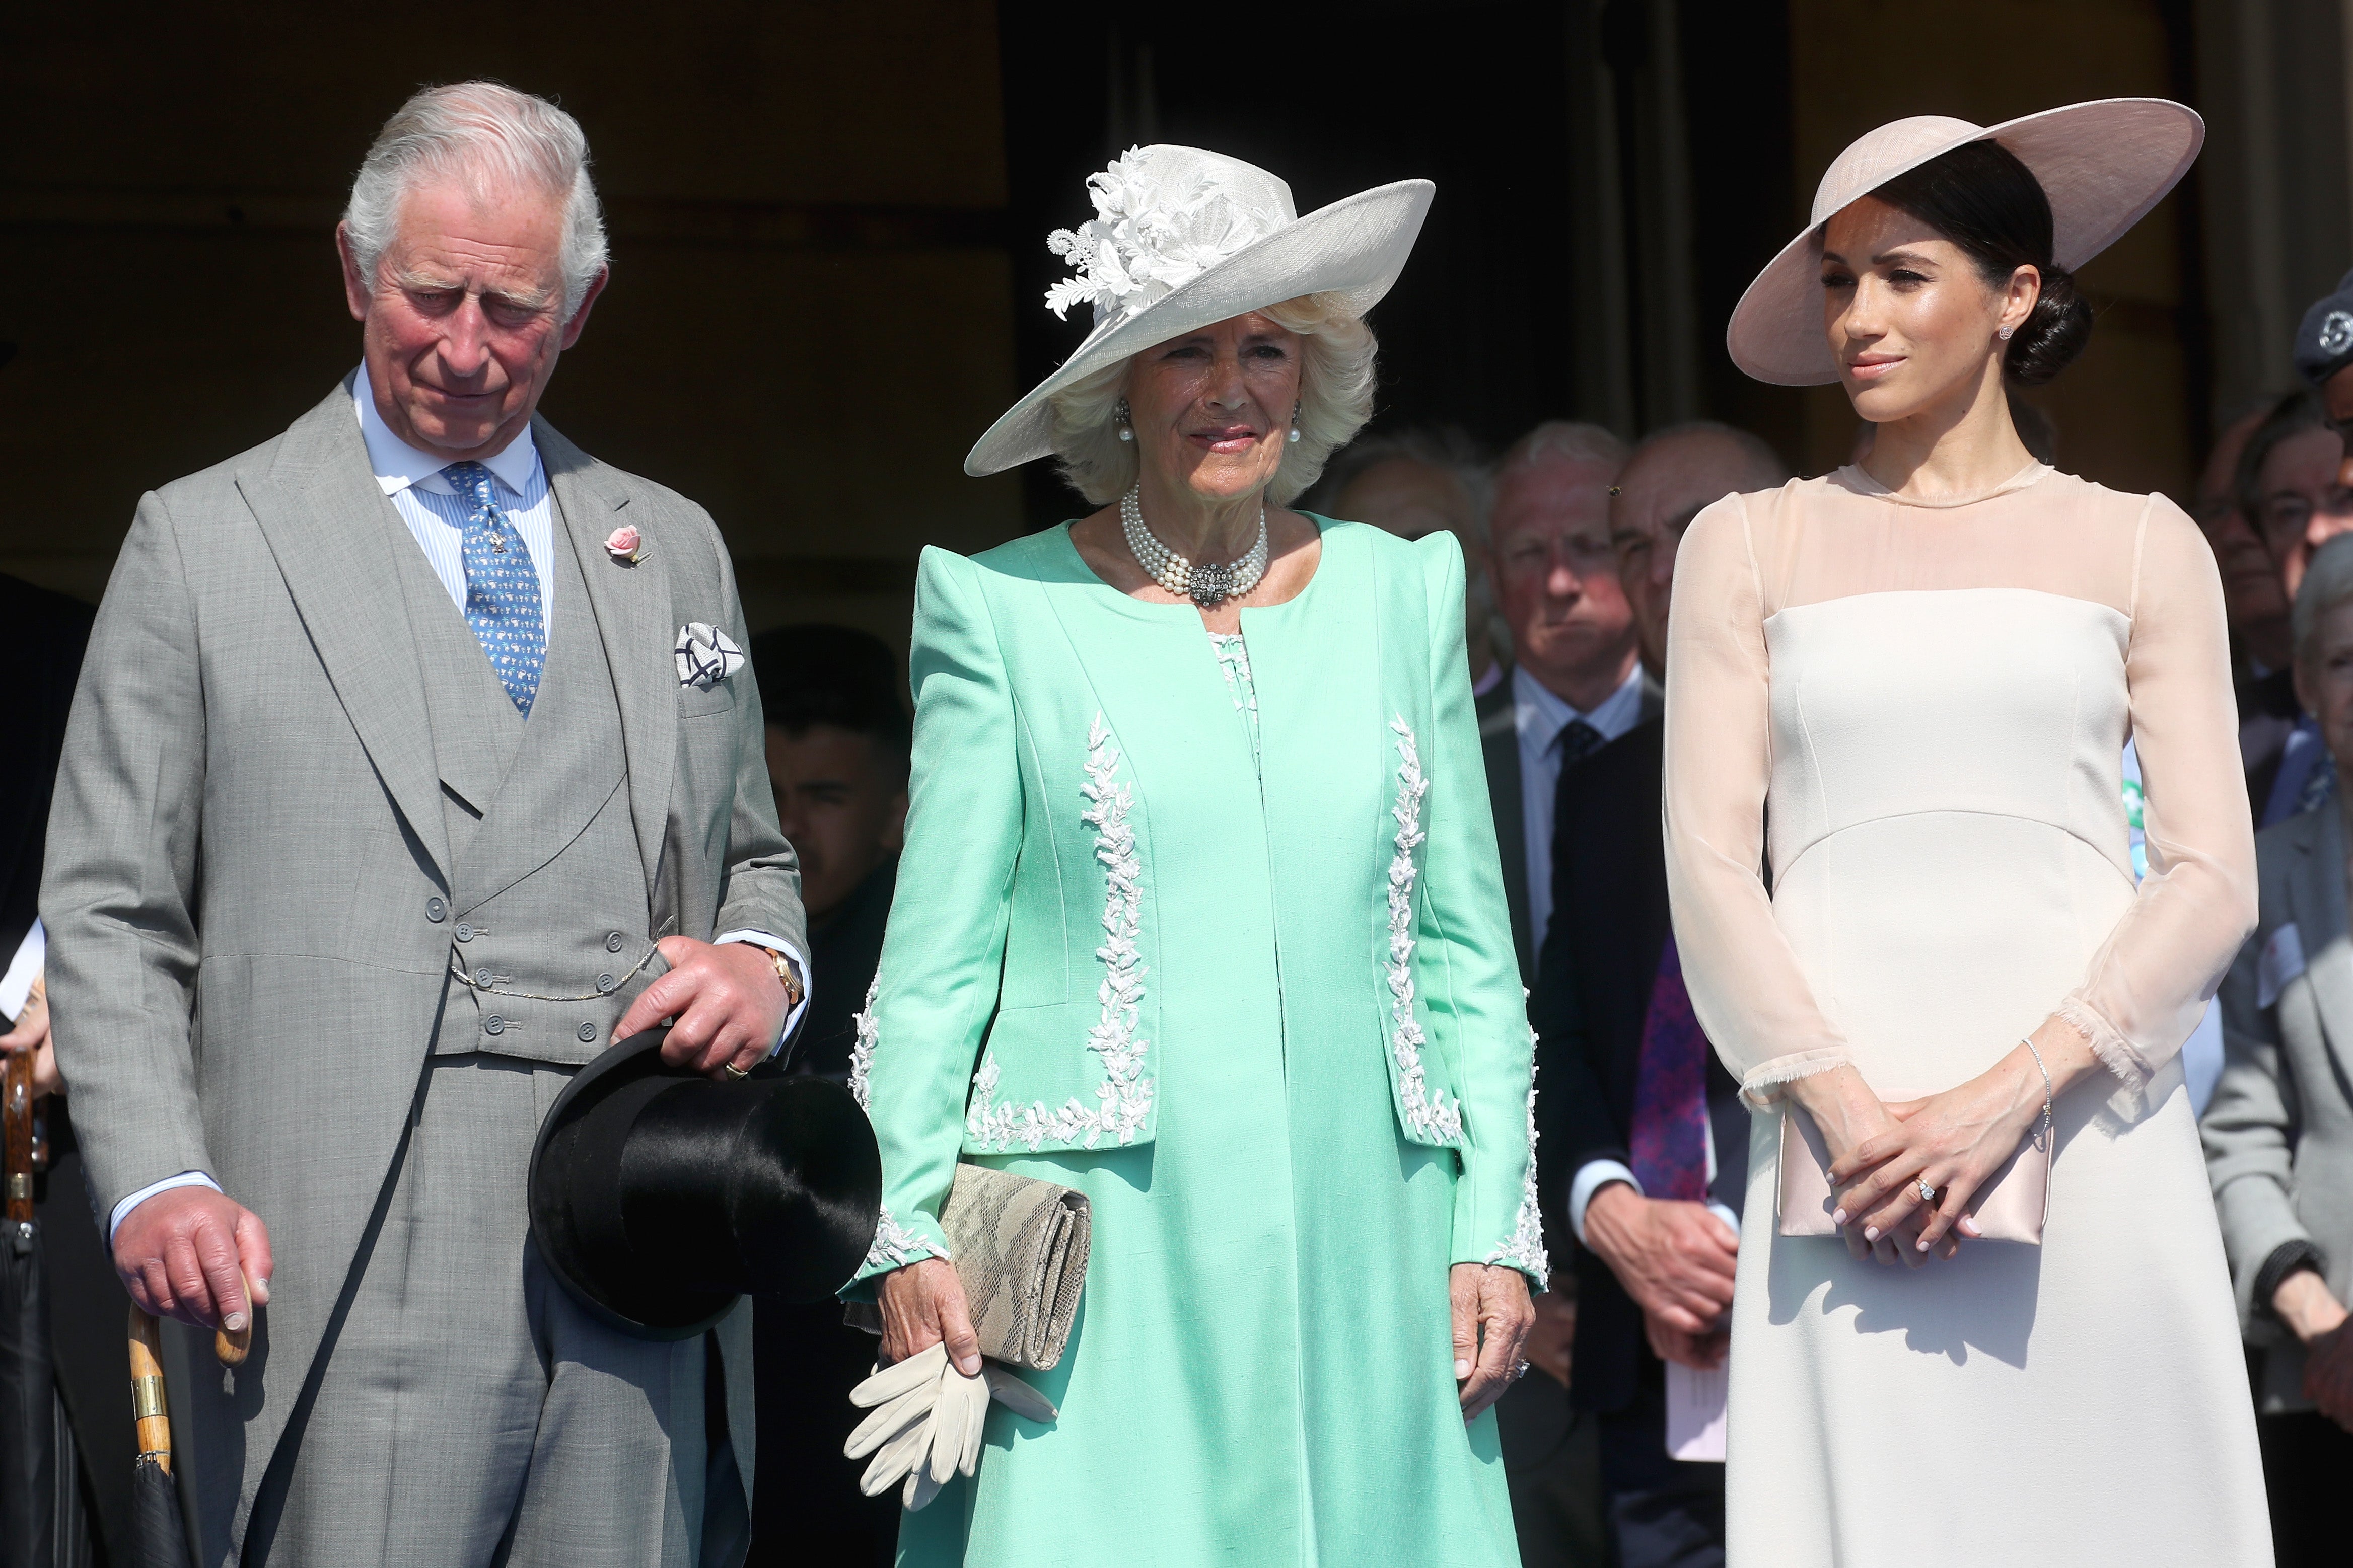 Prince Charles, the Duchess of Cornwall, and Meghan Markle in May 2018